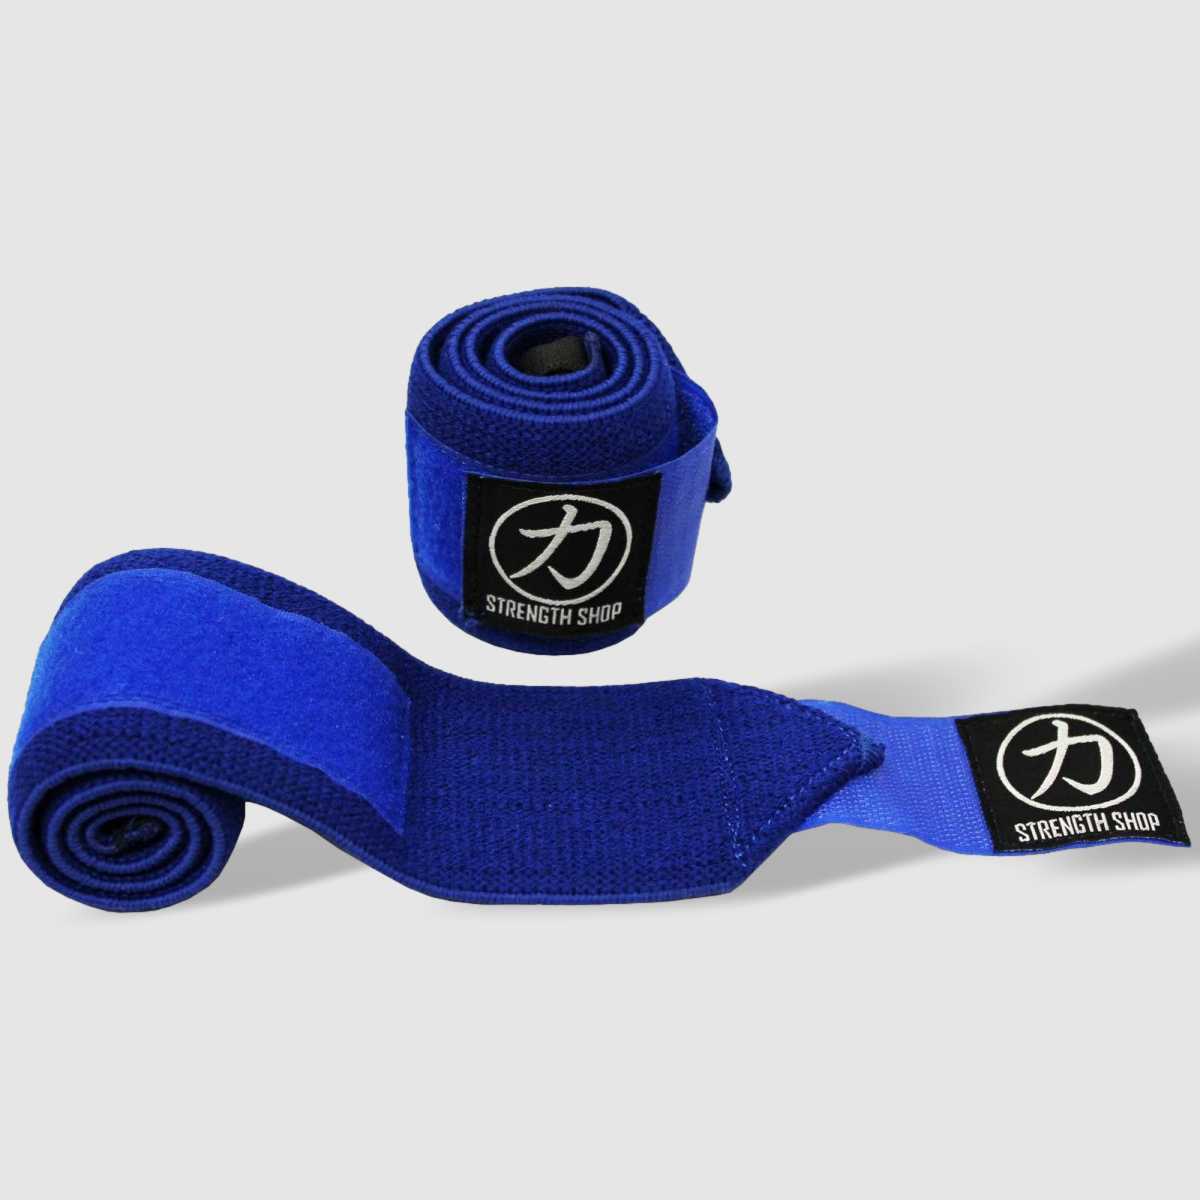 Rip Toned Wrist Wraps (blue) - 18 Professional Grade with Thumb Loops -  Wrist Support Braces - Men & Women - Weight Lifting, Crossfit,  Powerlifting, Strength Training, Sports Equipment, Other Sports Equipment